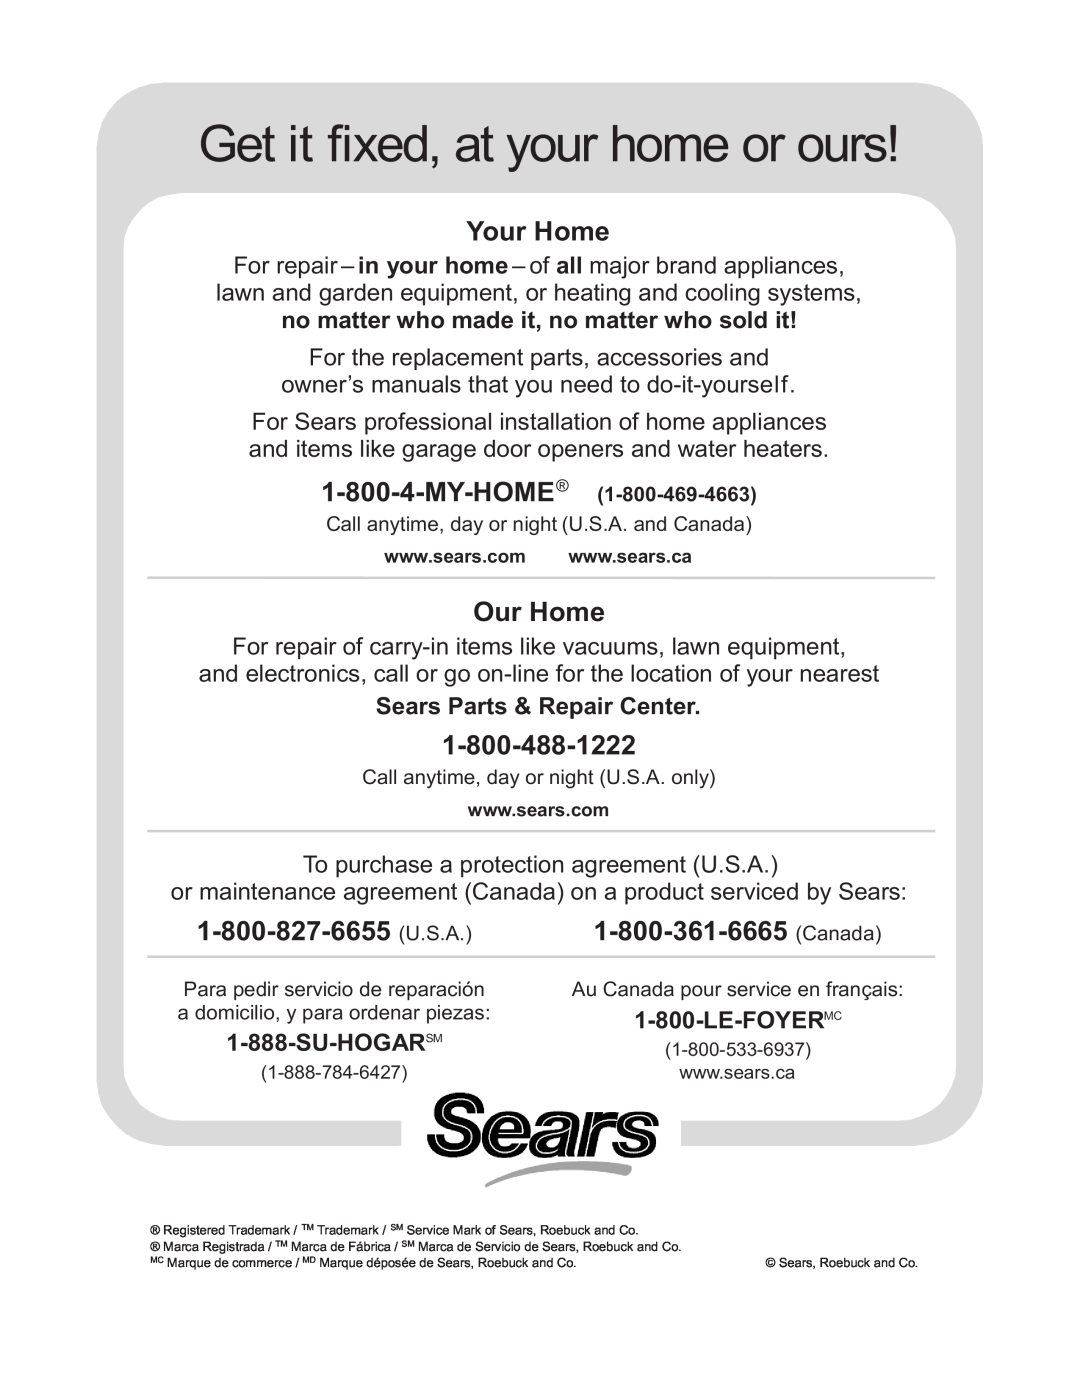 Sears P12L0052, P12V0067 Get it fixed, at your home or ours, Your Home, Our Home, Sears Parts & Repair Center, Su-Hogarsm 